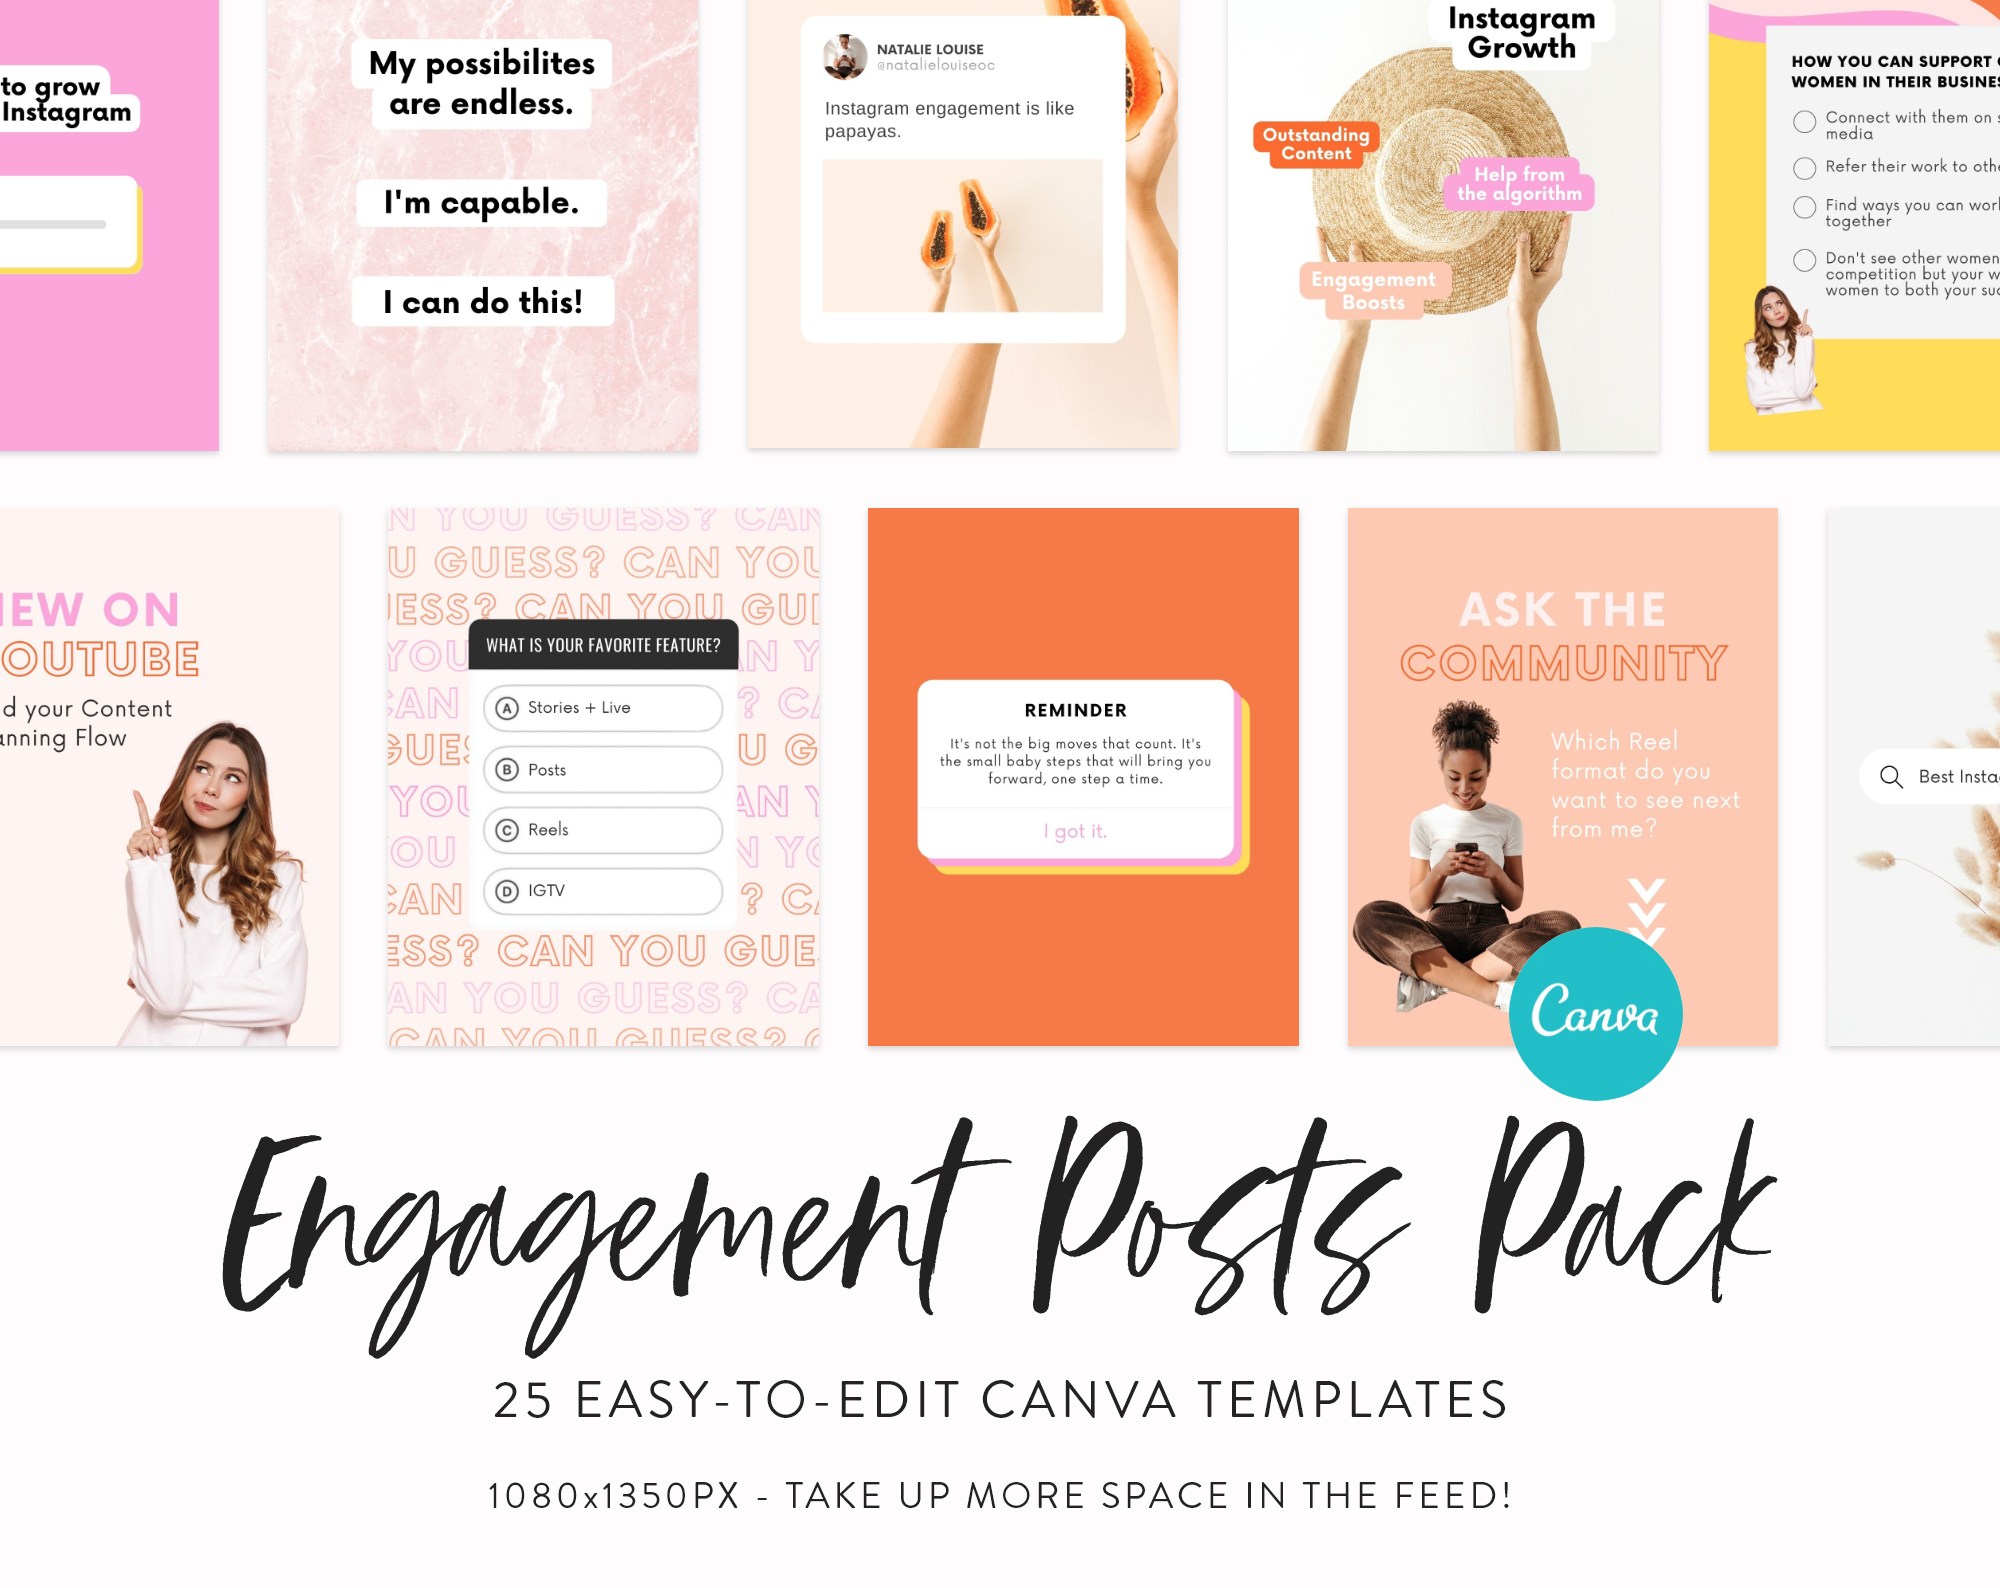 Instagram-Engagement-power-posts-pack-for-canva-overview-2